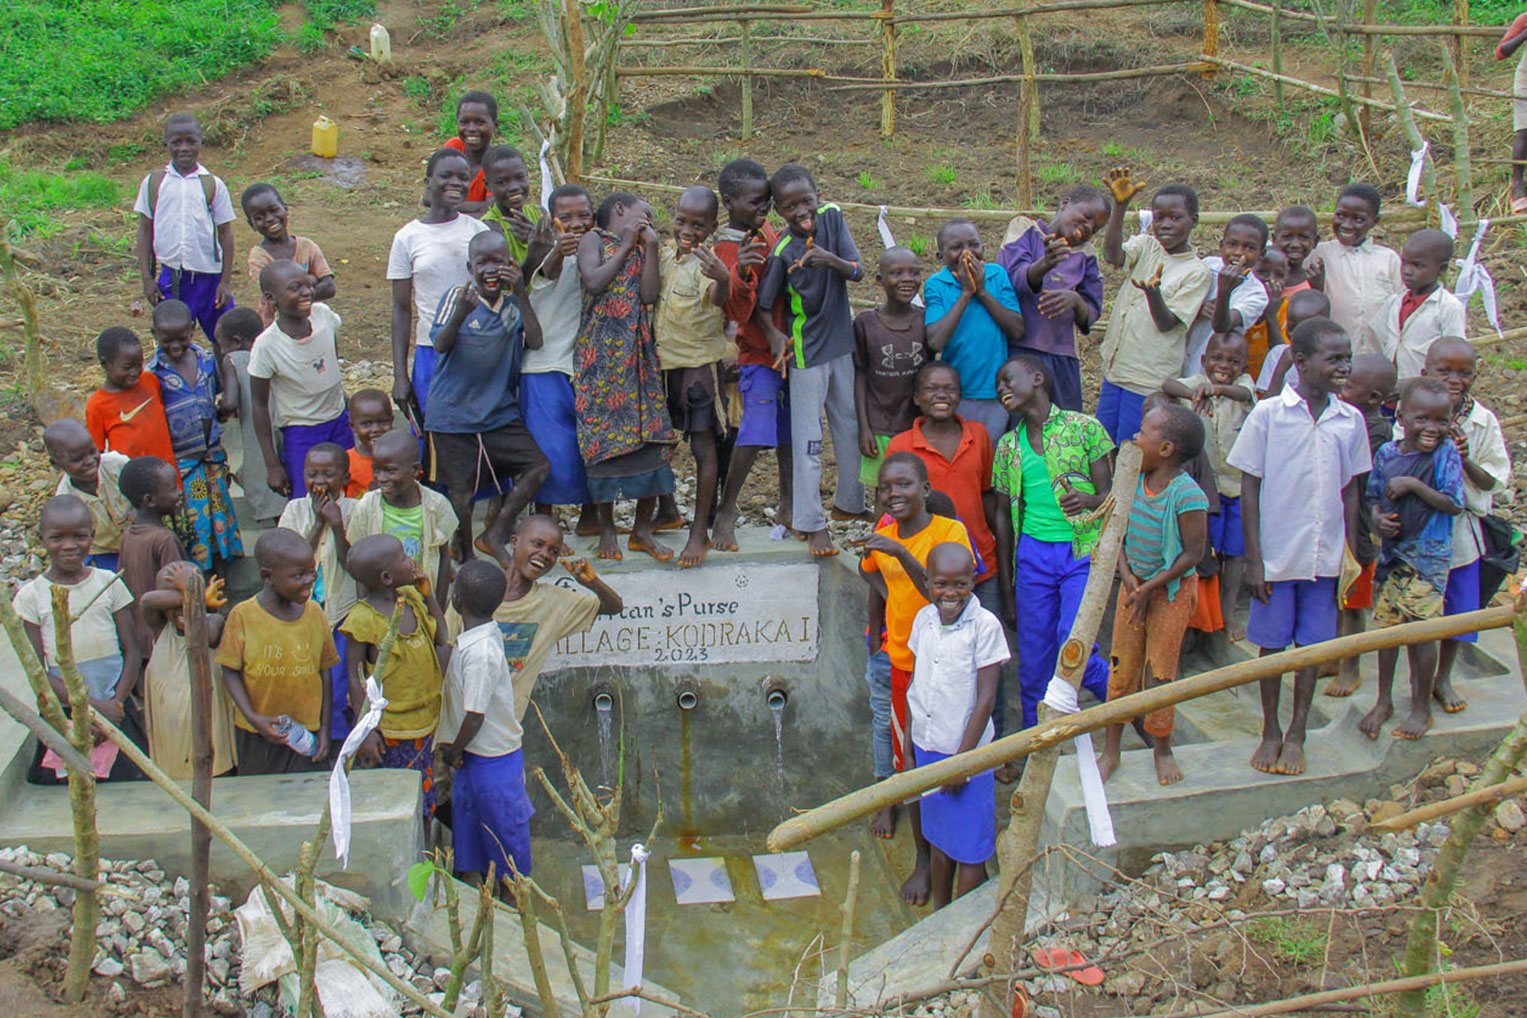 The village children enjoyed tasting the clean water coming out of the water point constructed by Samaritan's Purse.